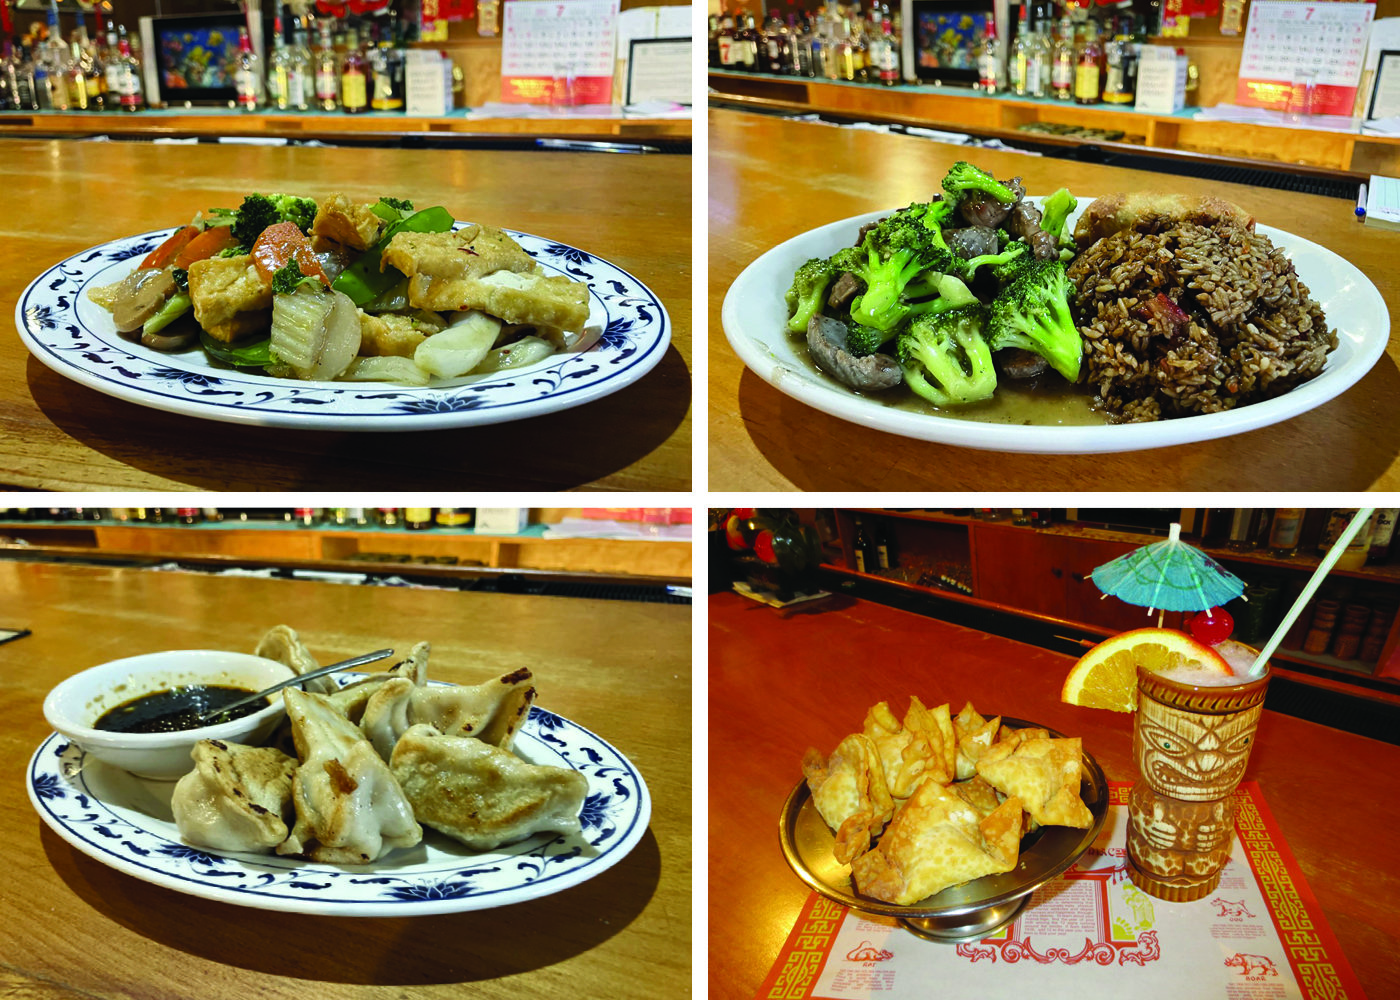 As you make your way down Post Road these days, swing into China Sea for one of their sensational combo platters and crunchy Crab Rangoons! What’s for dinner tonight??